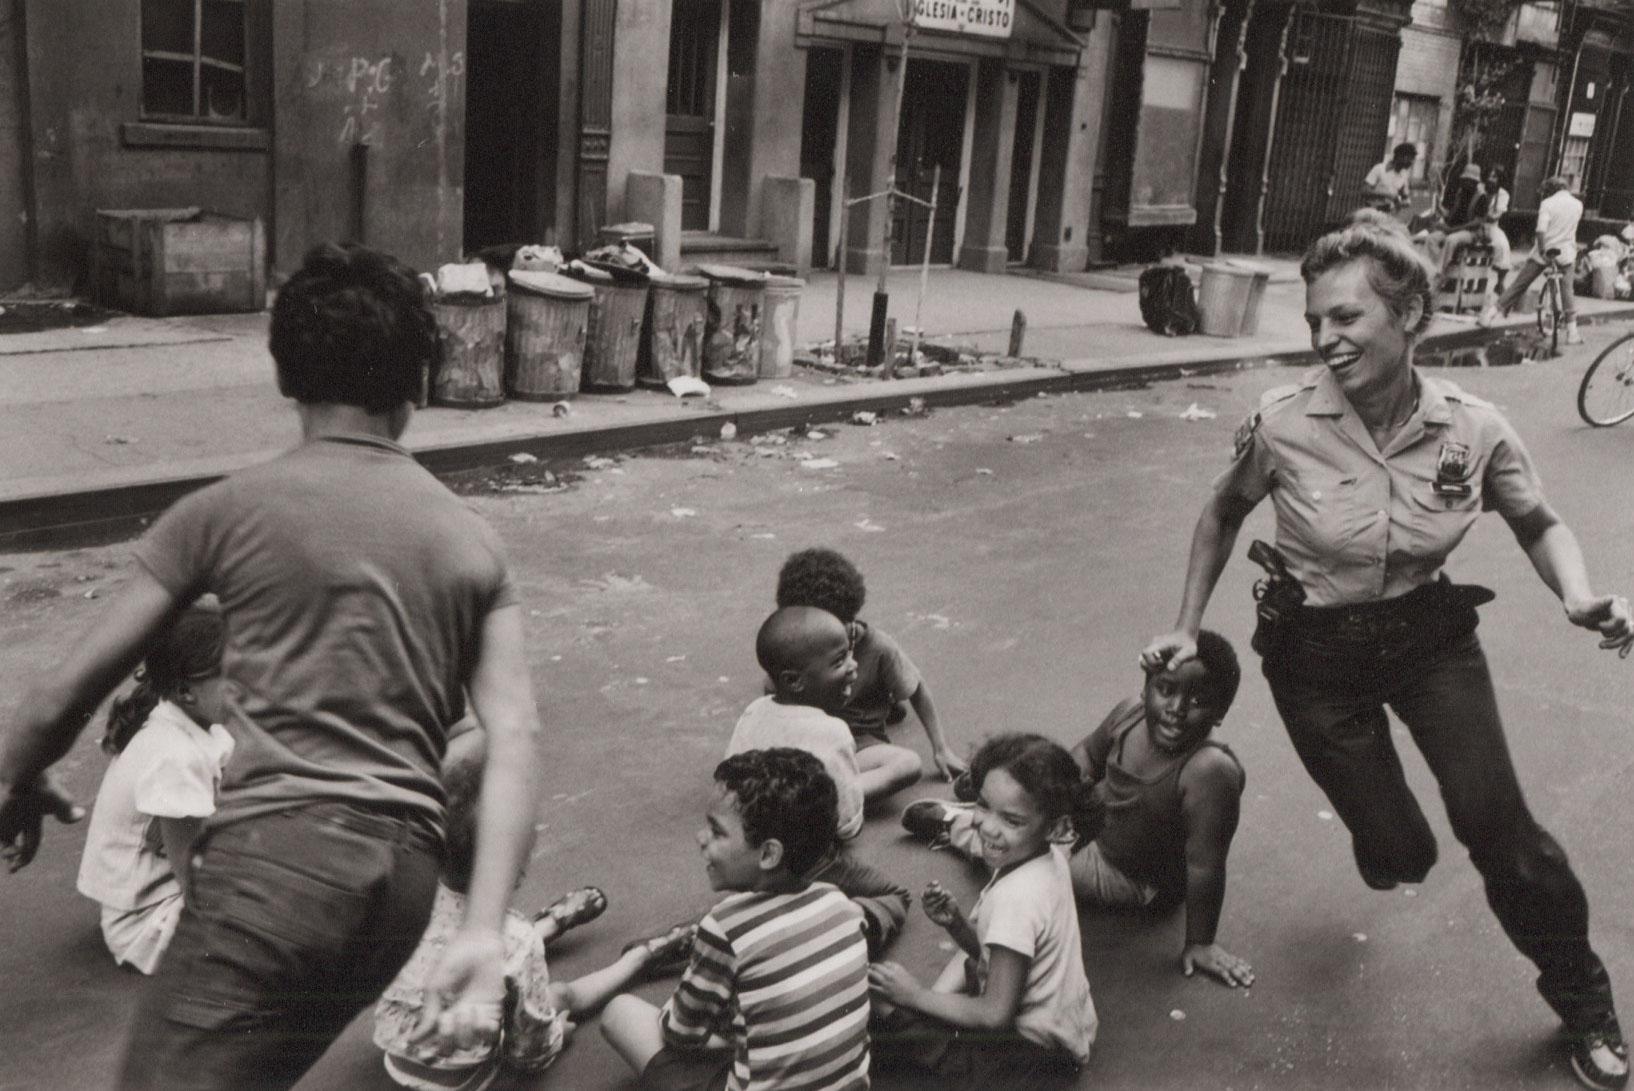 A policewoman plays with local kids in Harlem, New York City, USA, 1978 - Photograph by Leonard Freed